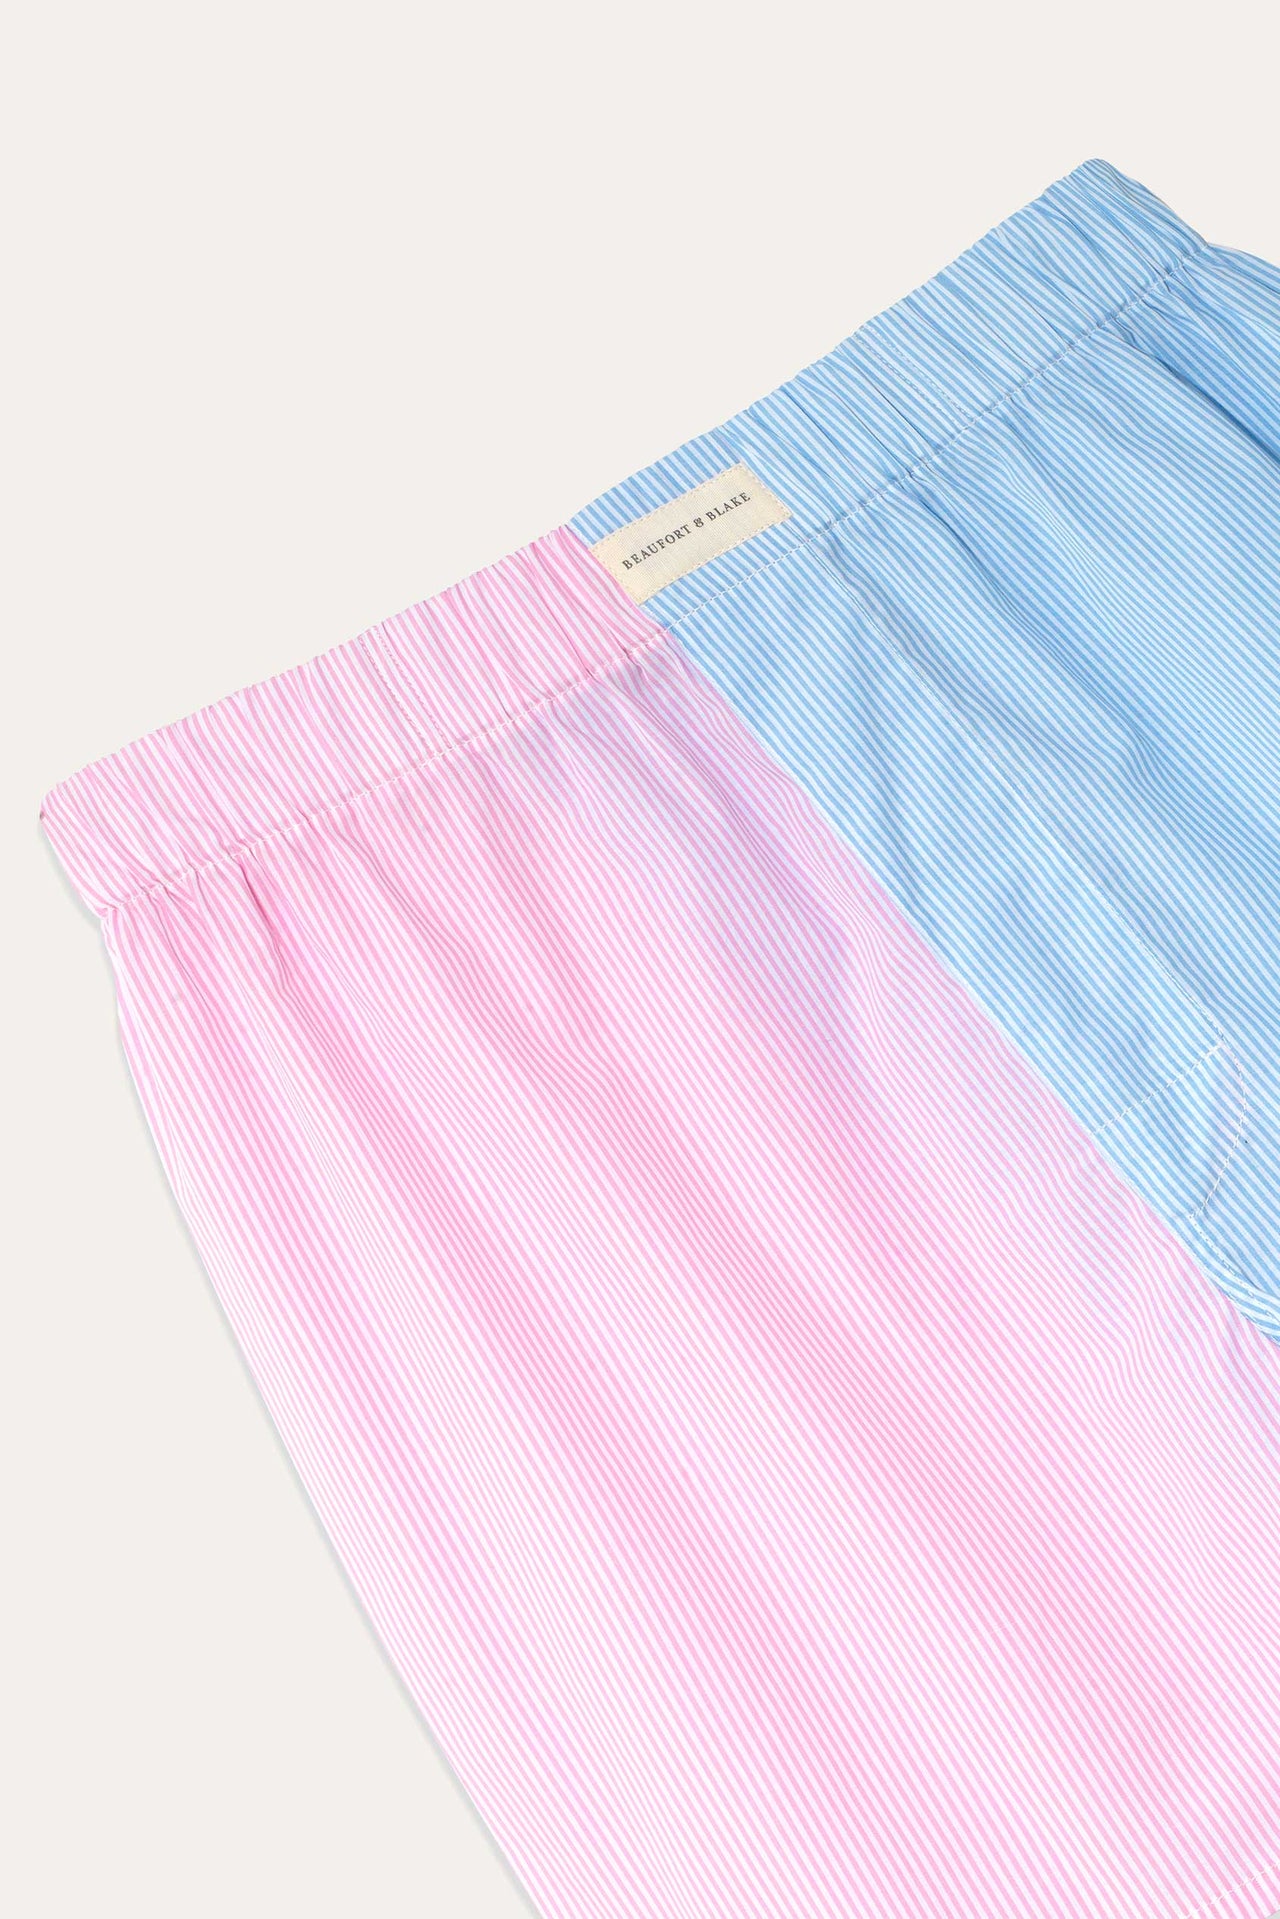 Fine stripe pink and blue colour block poplin boxers. Elasticated waistband and extra rear seat panel for added comfort. Made in Portugal. Machine Wash. Underwear. Size S, M, L, XL, XXL.